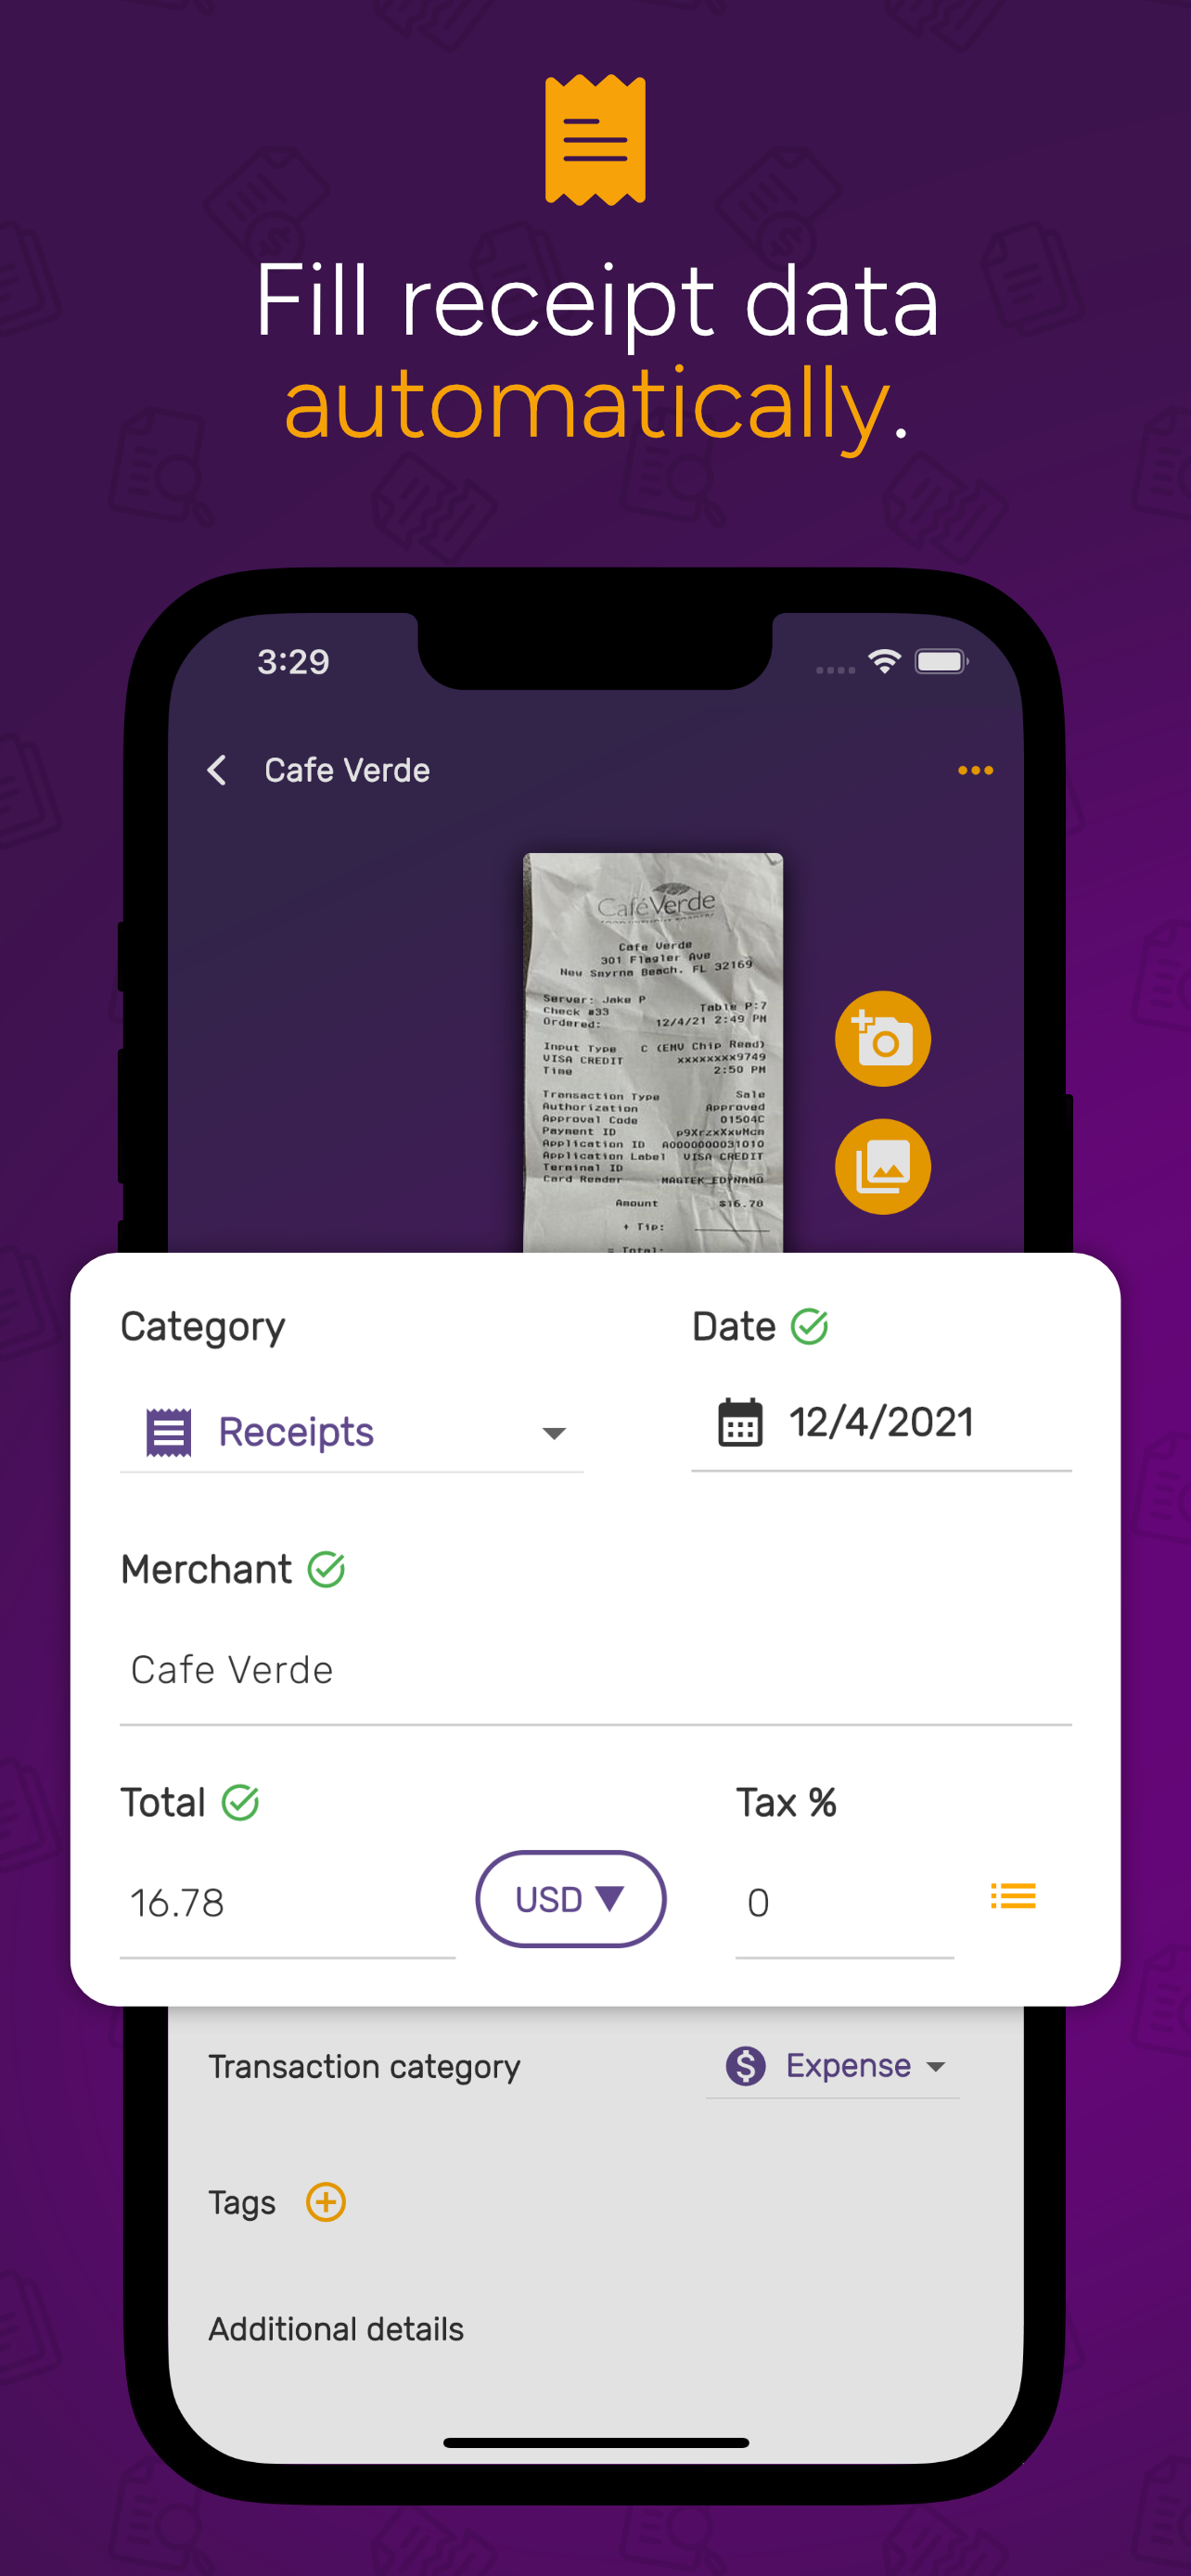 Use the latest AI technology to accurately scan receipts.